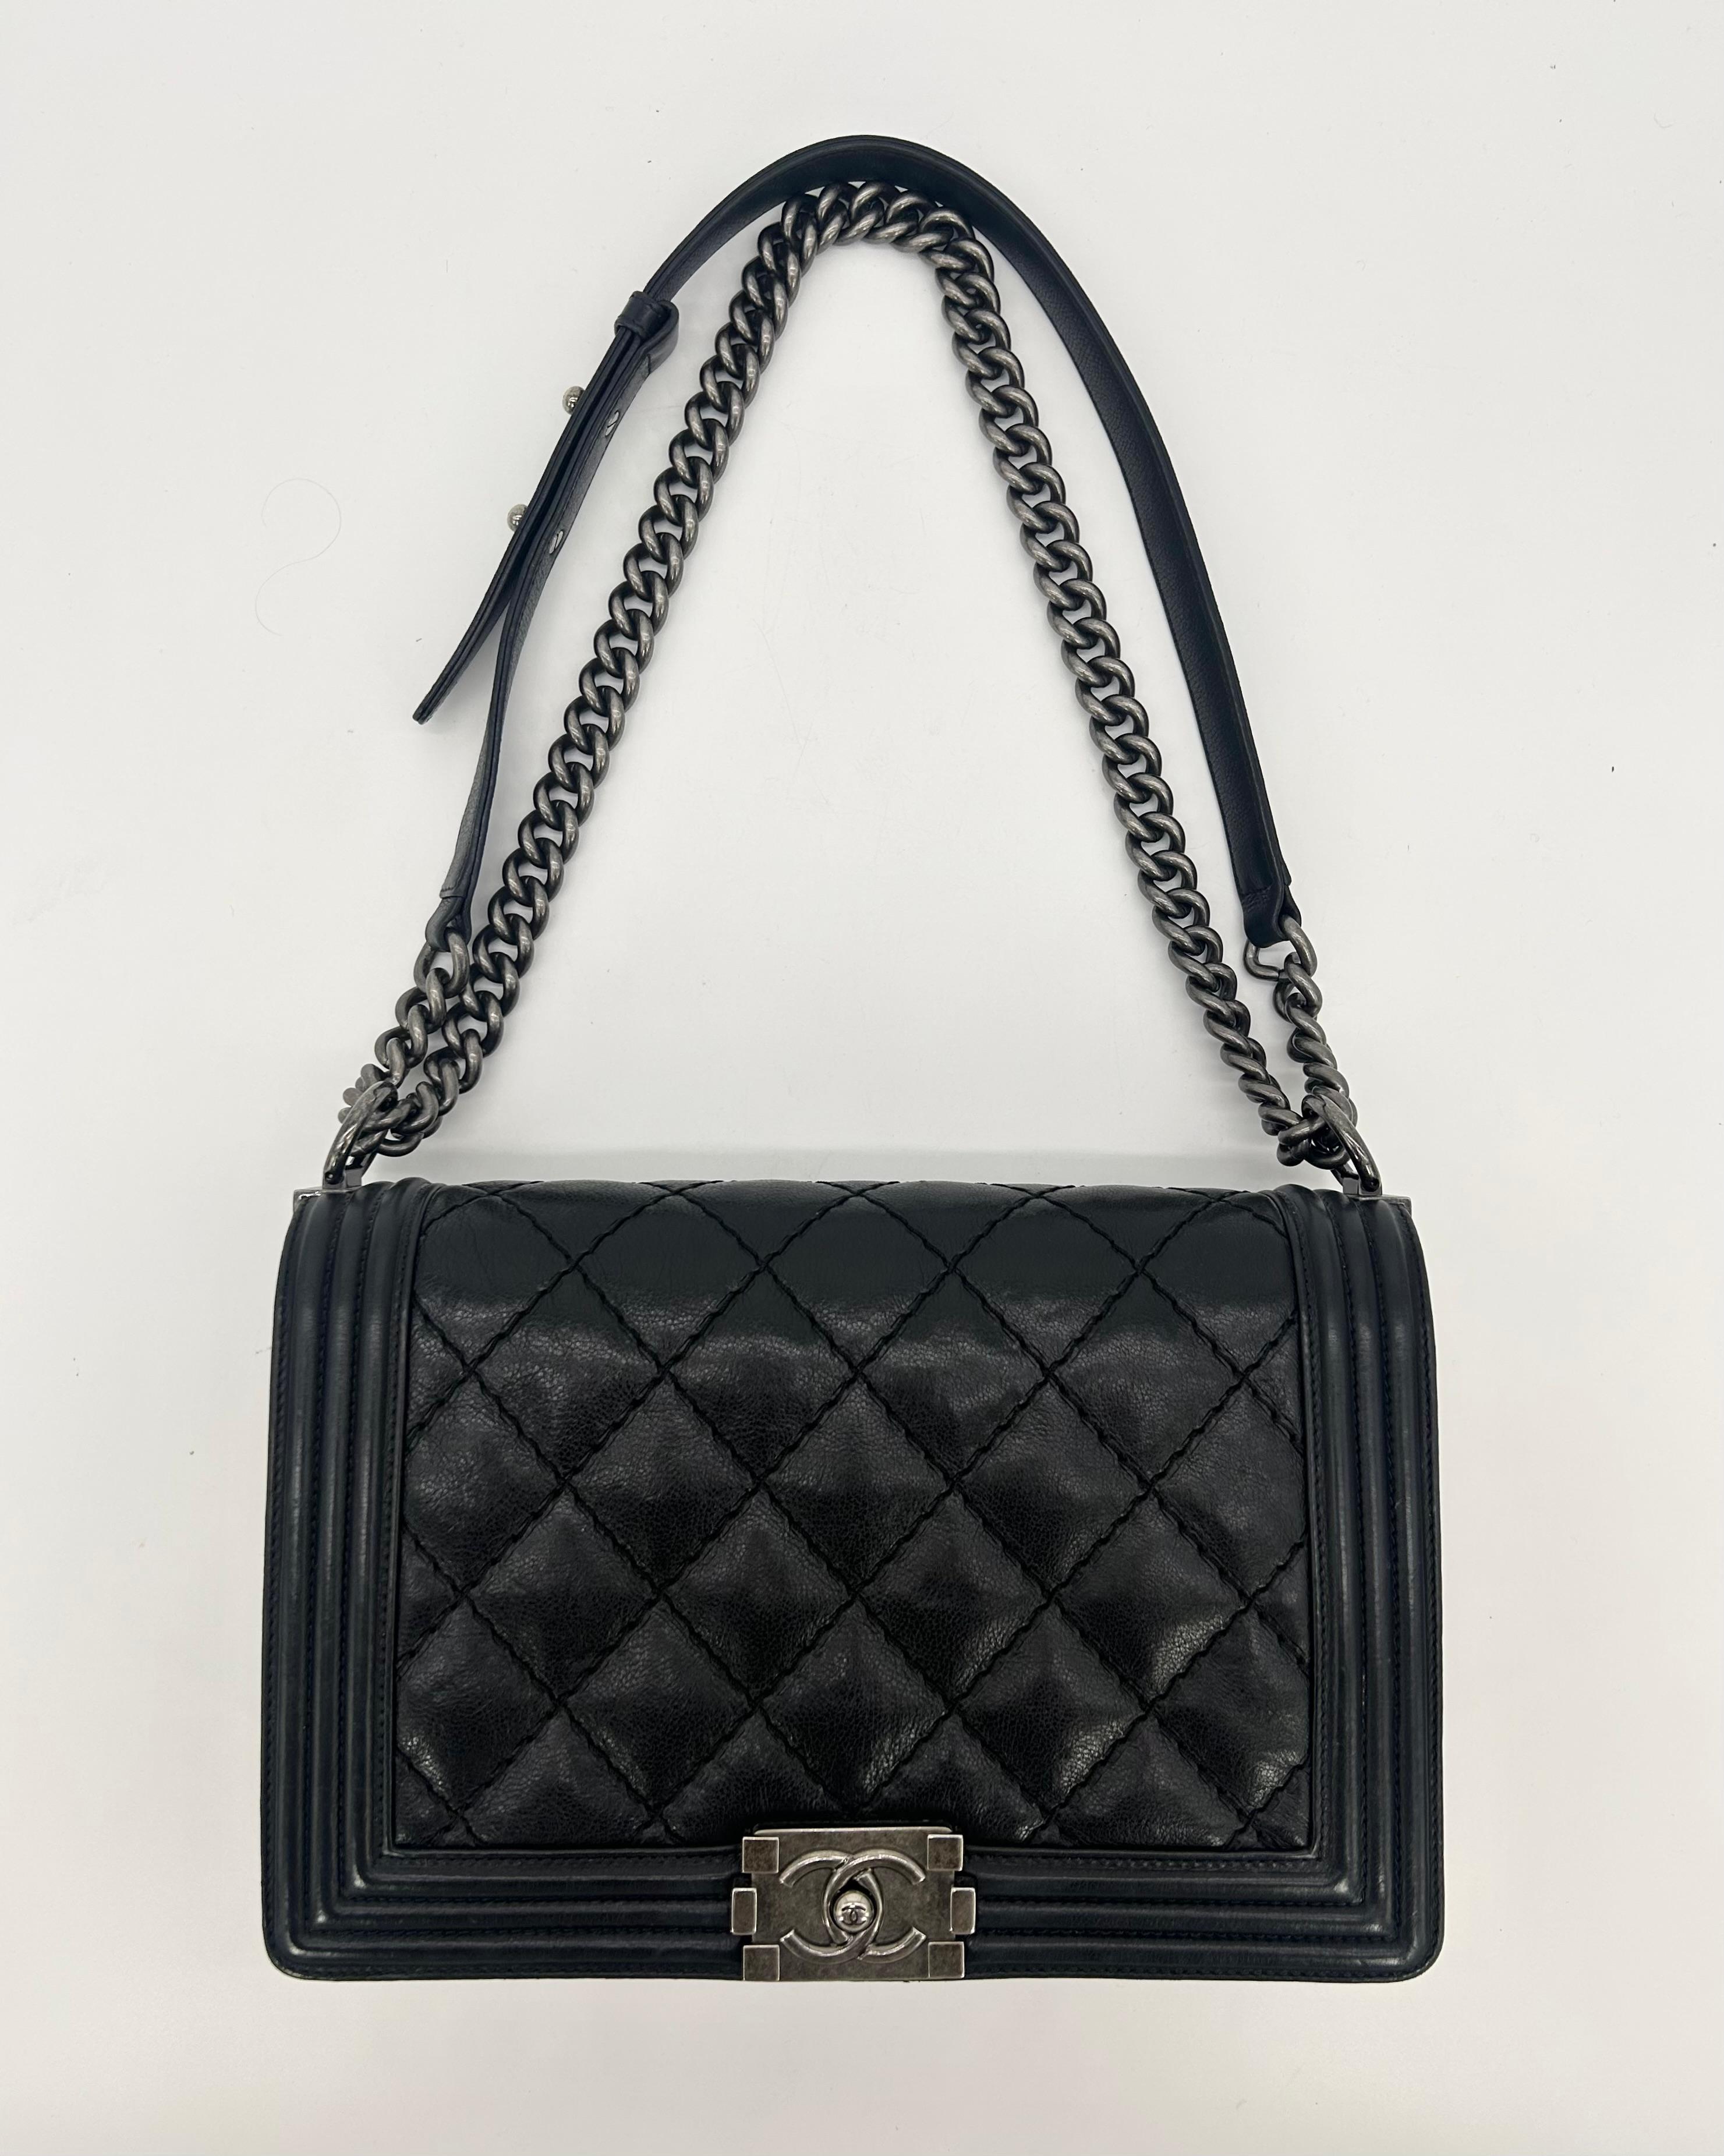 Chanel Black Lambskin Quilted Medium Boy Bag For Sale 3